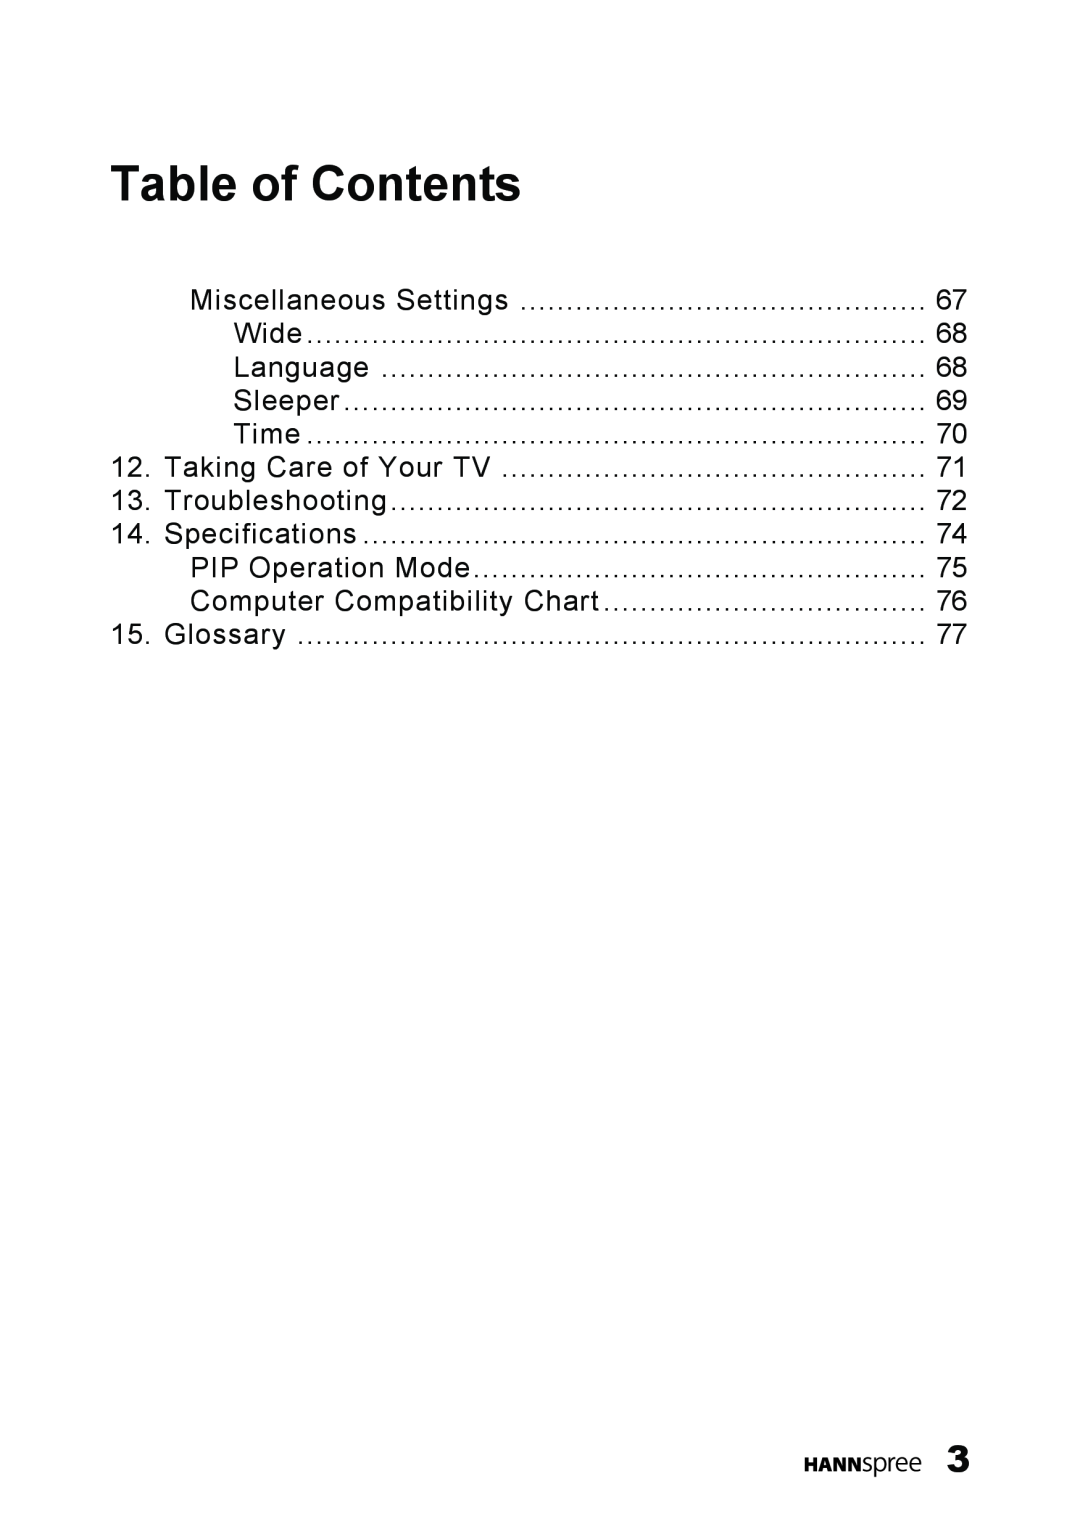 HANNspree LT11-23A1 user manual Table of Contents, Miscellaneous Settings 